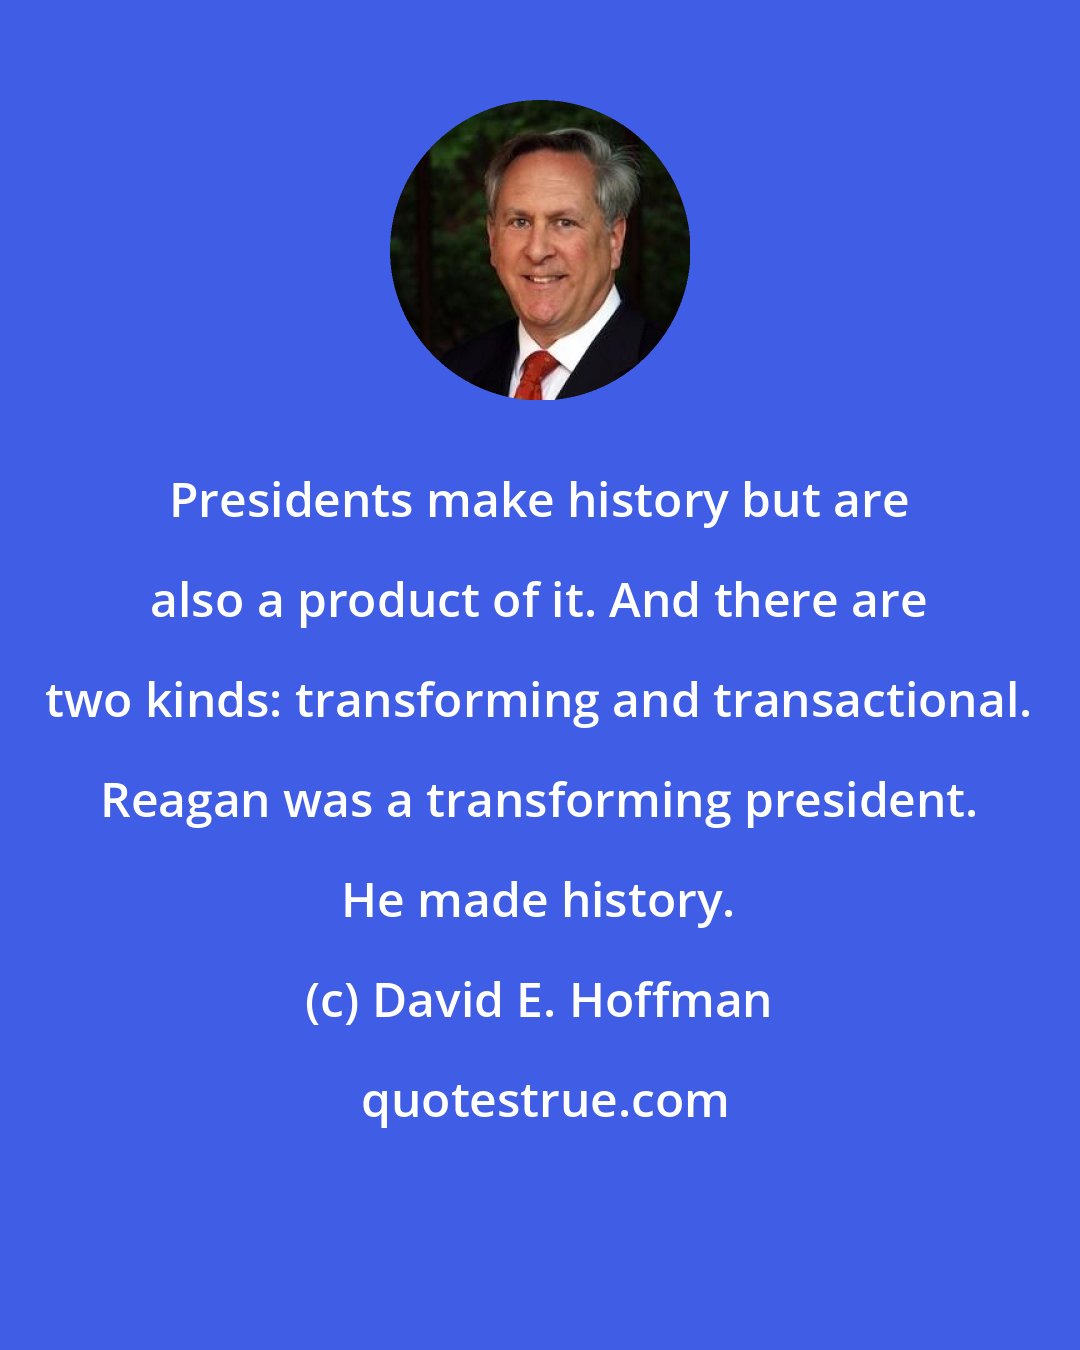 David E. Hoffman: Presidents make history but are also a product of it. And there are two kinds: transforming and transactional. Reagan was a transforming president. He made history.